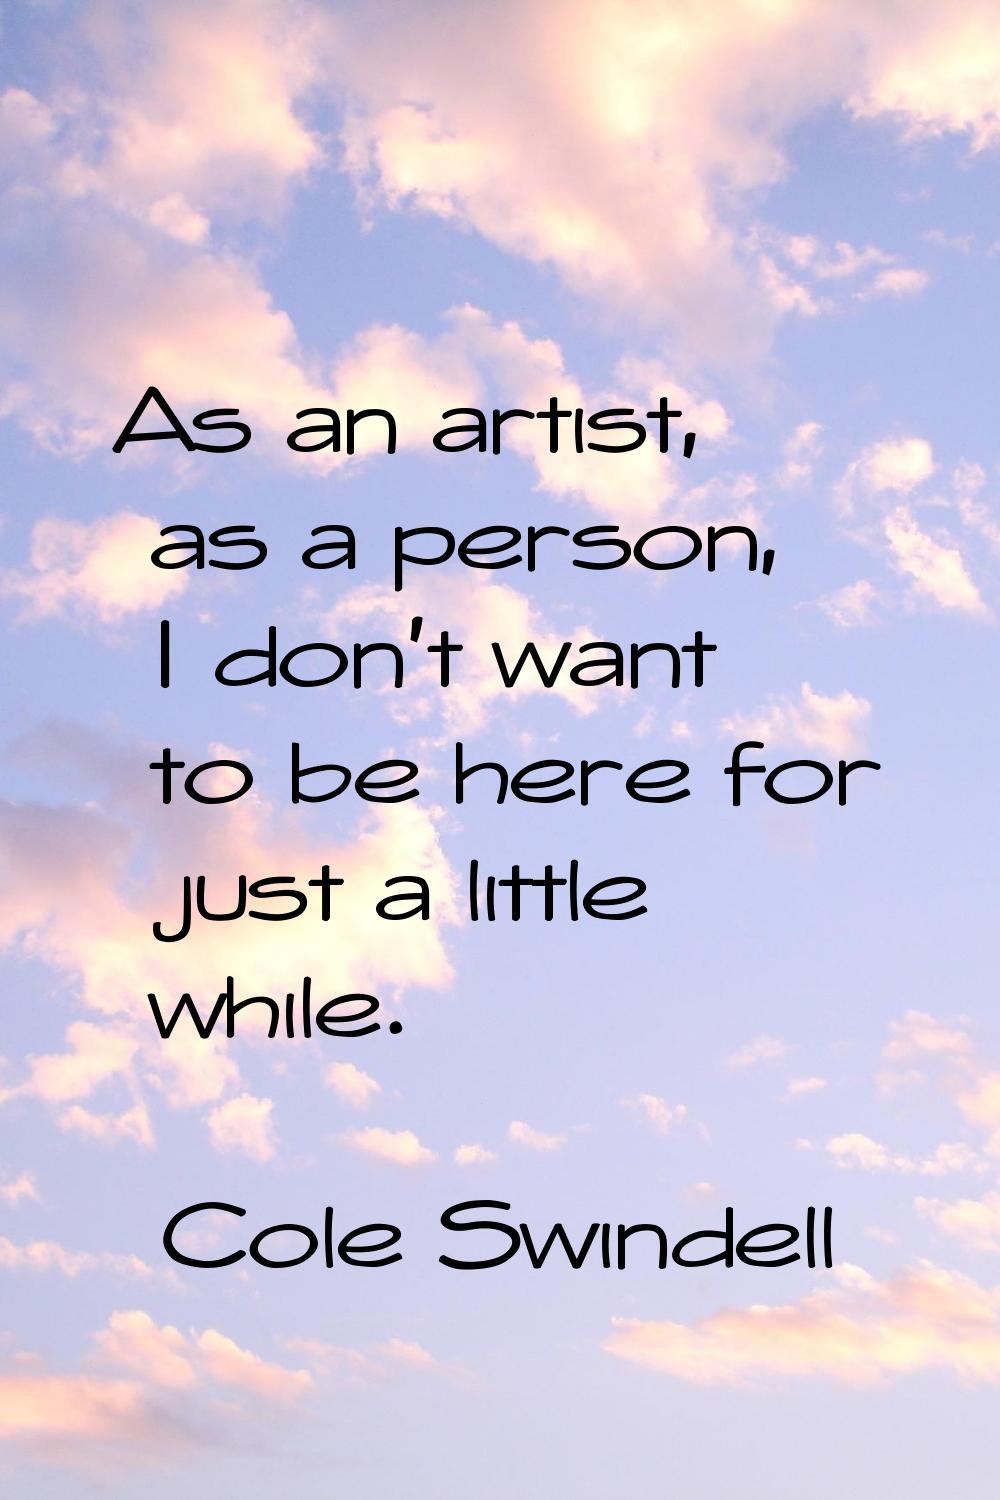 As an artist, as a person, I don't want to be here for just a little while.